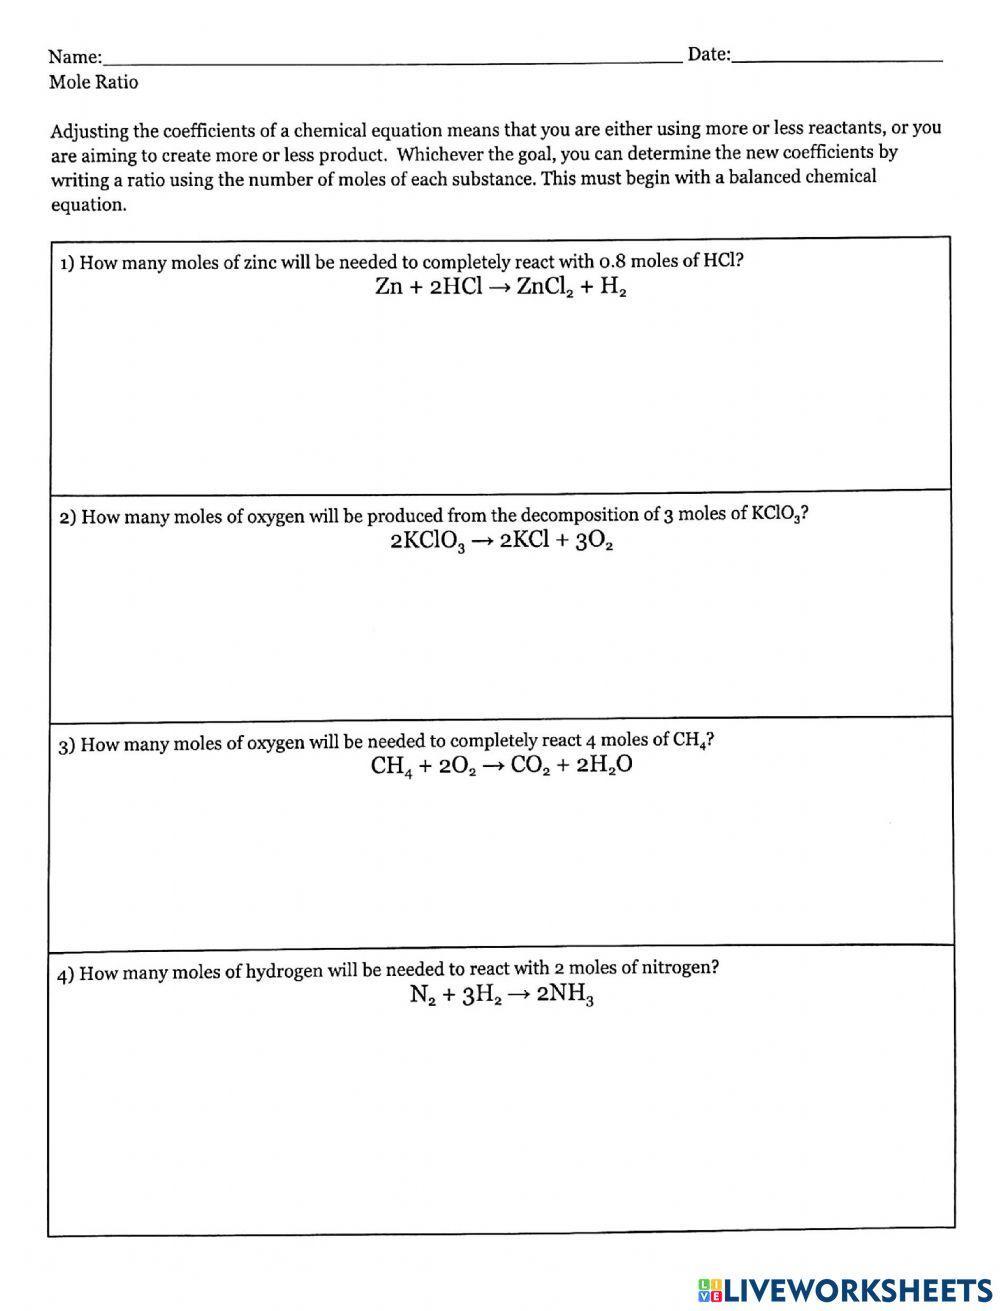 Ratio practice in chemical equations